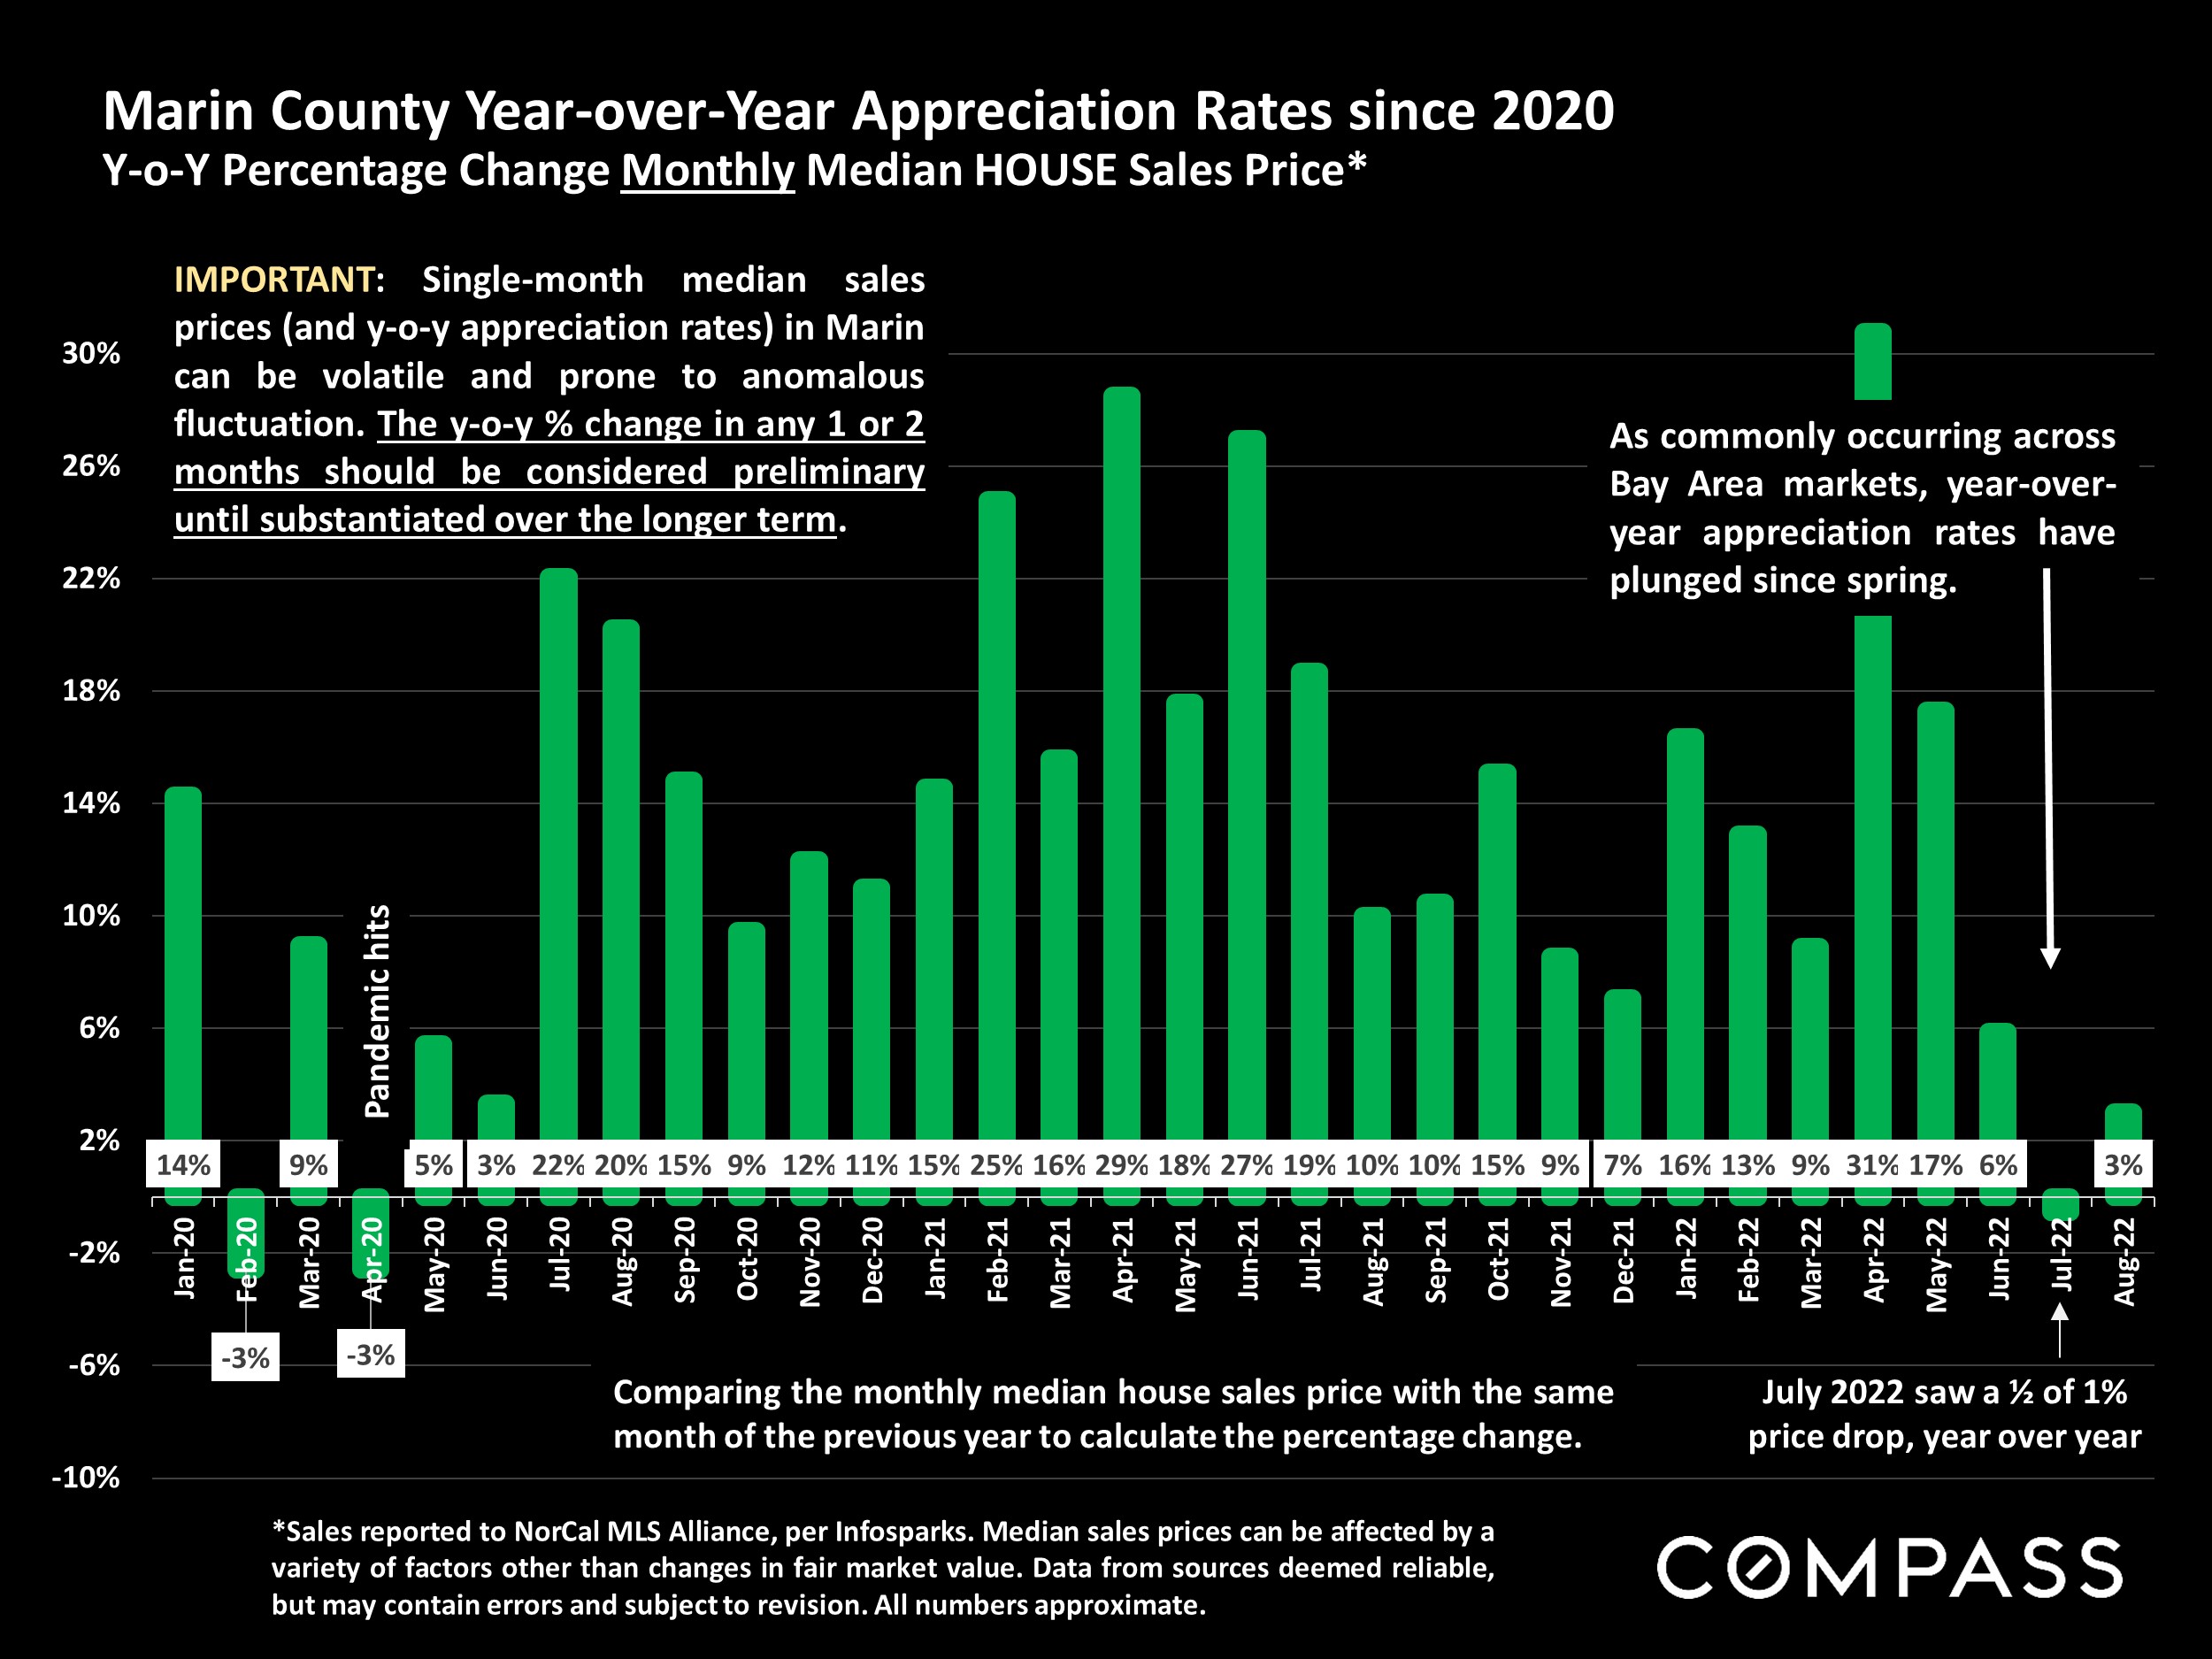 Marin County Year-over-Year Appreciation Rates since 2020